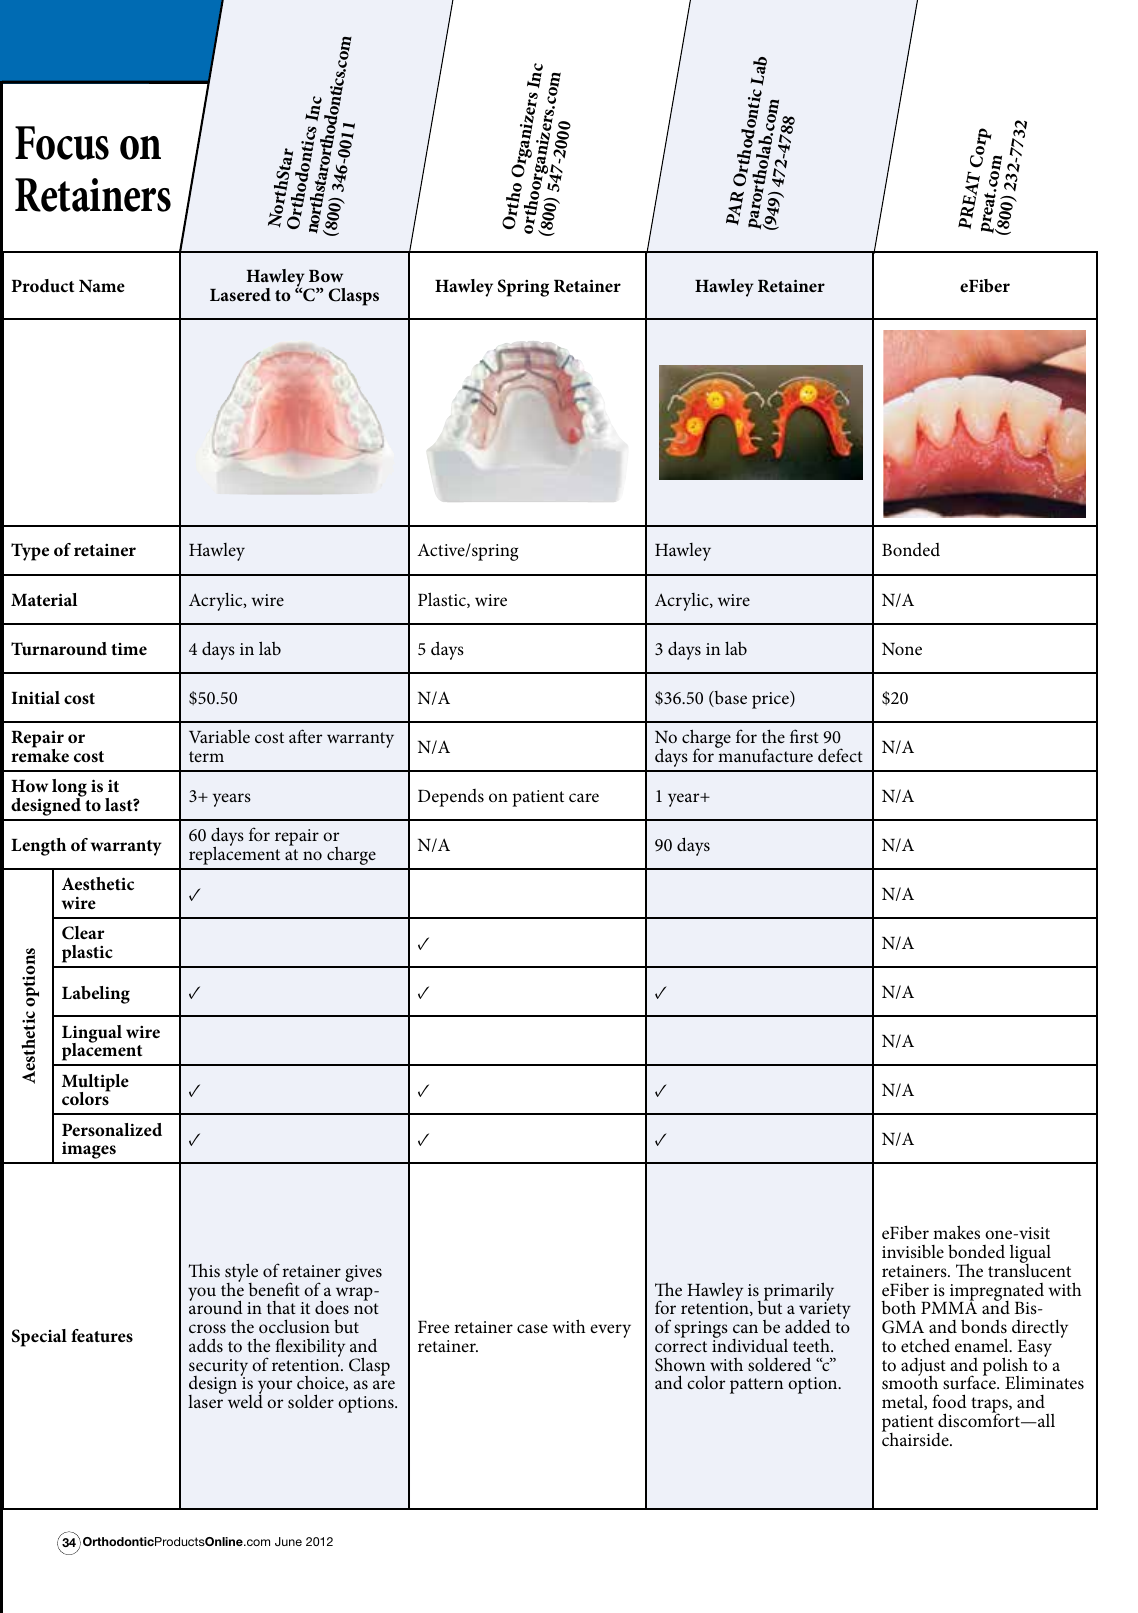 Page 4 of 6 - Images Editorial Orthodontic-products Pdf OP Focus Retainers June2012